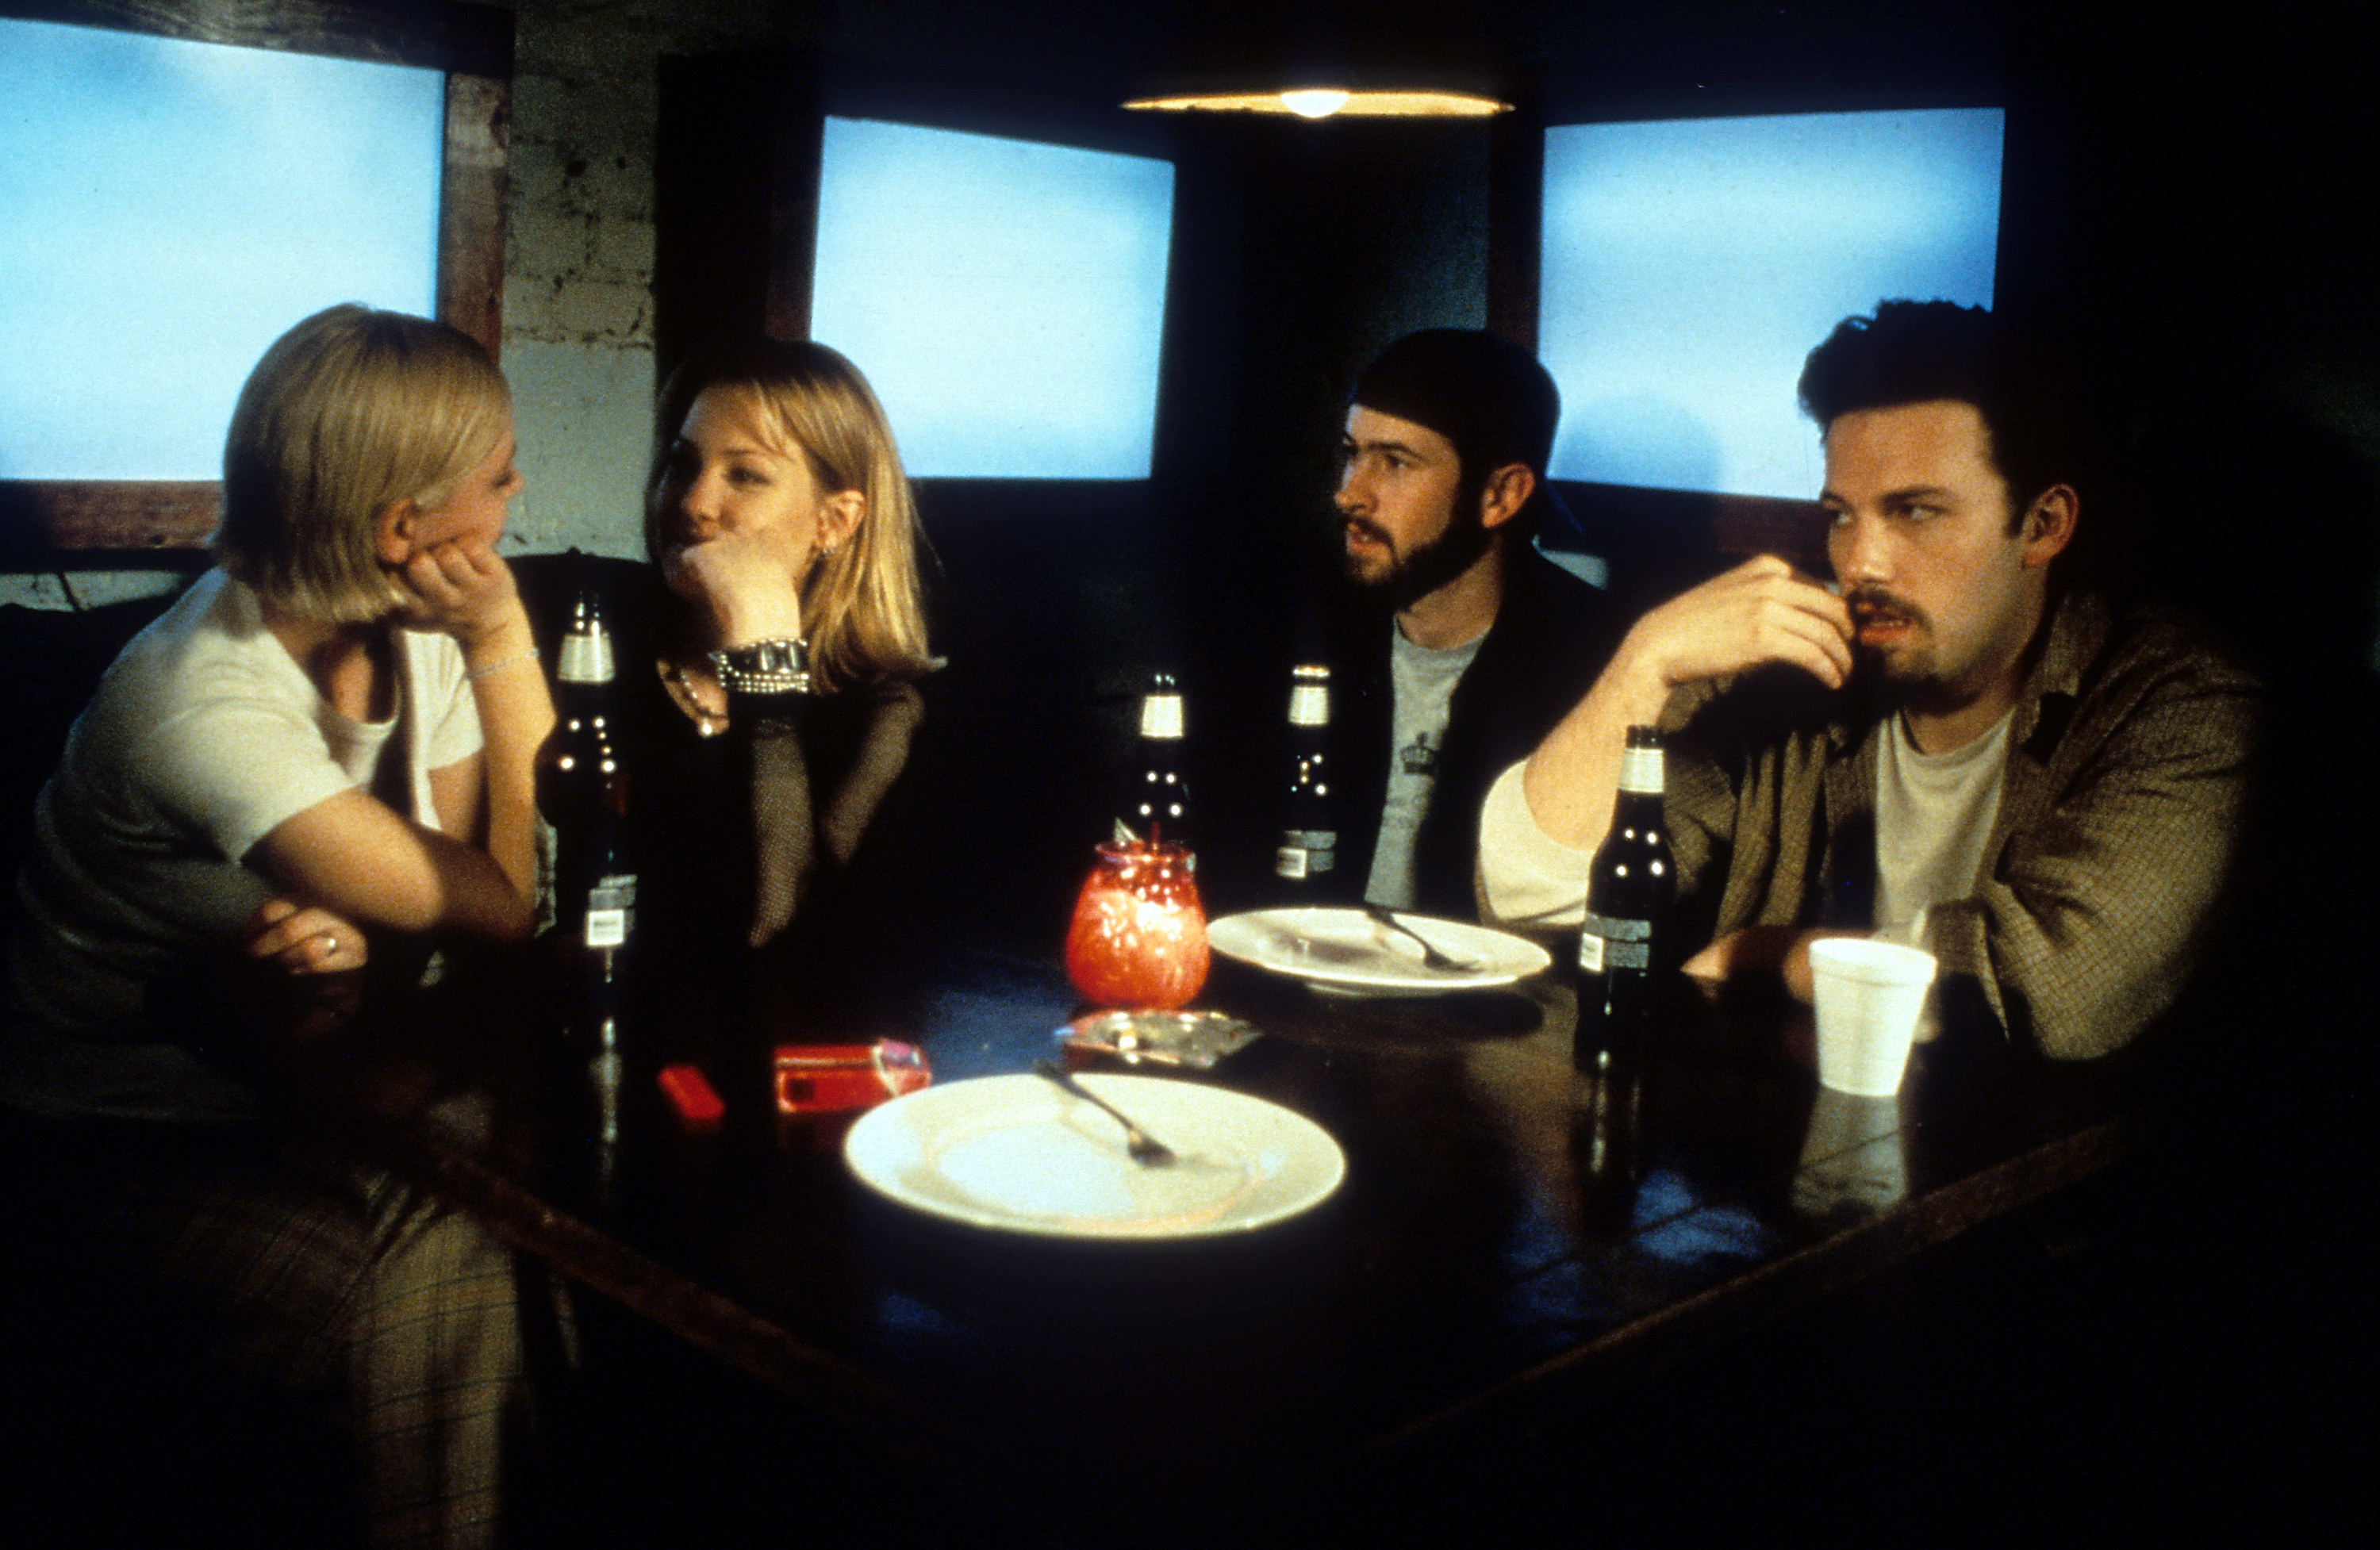 Ben Affleck, Jason Lee and Joey Lauren Adams sitting at a dining table in a scene from the film &#x27;Chasing Amy&#x27;, 1997